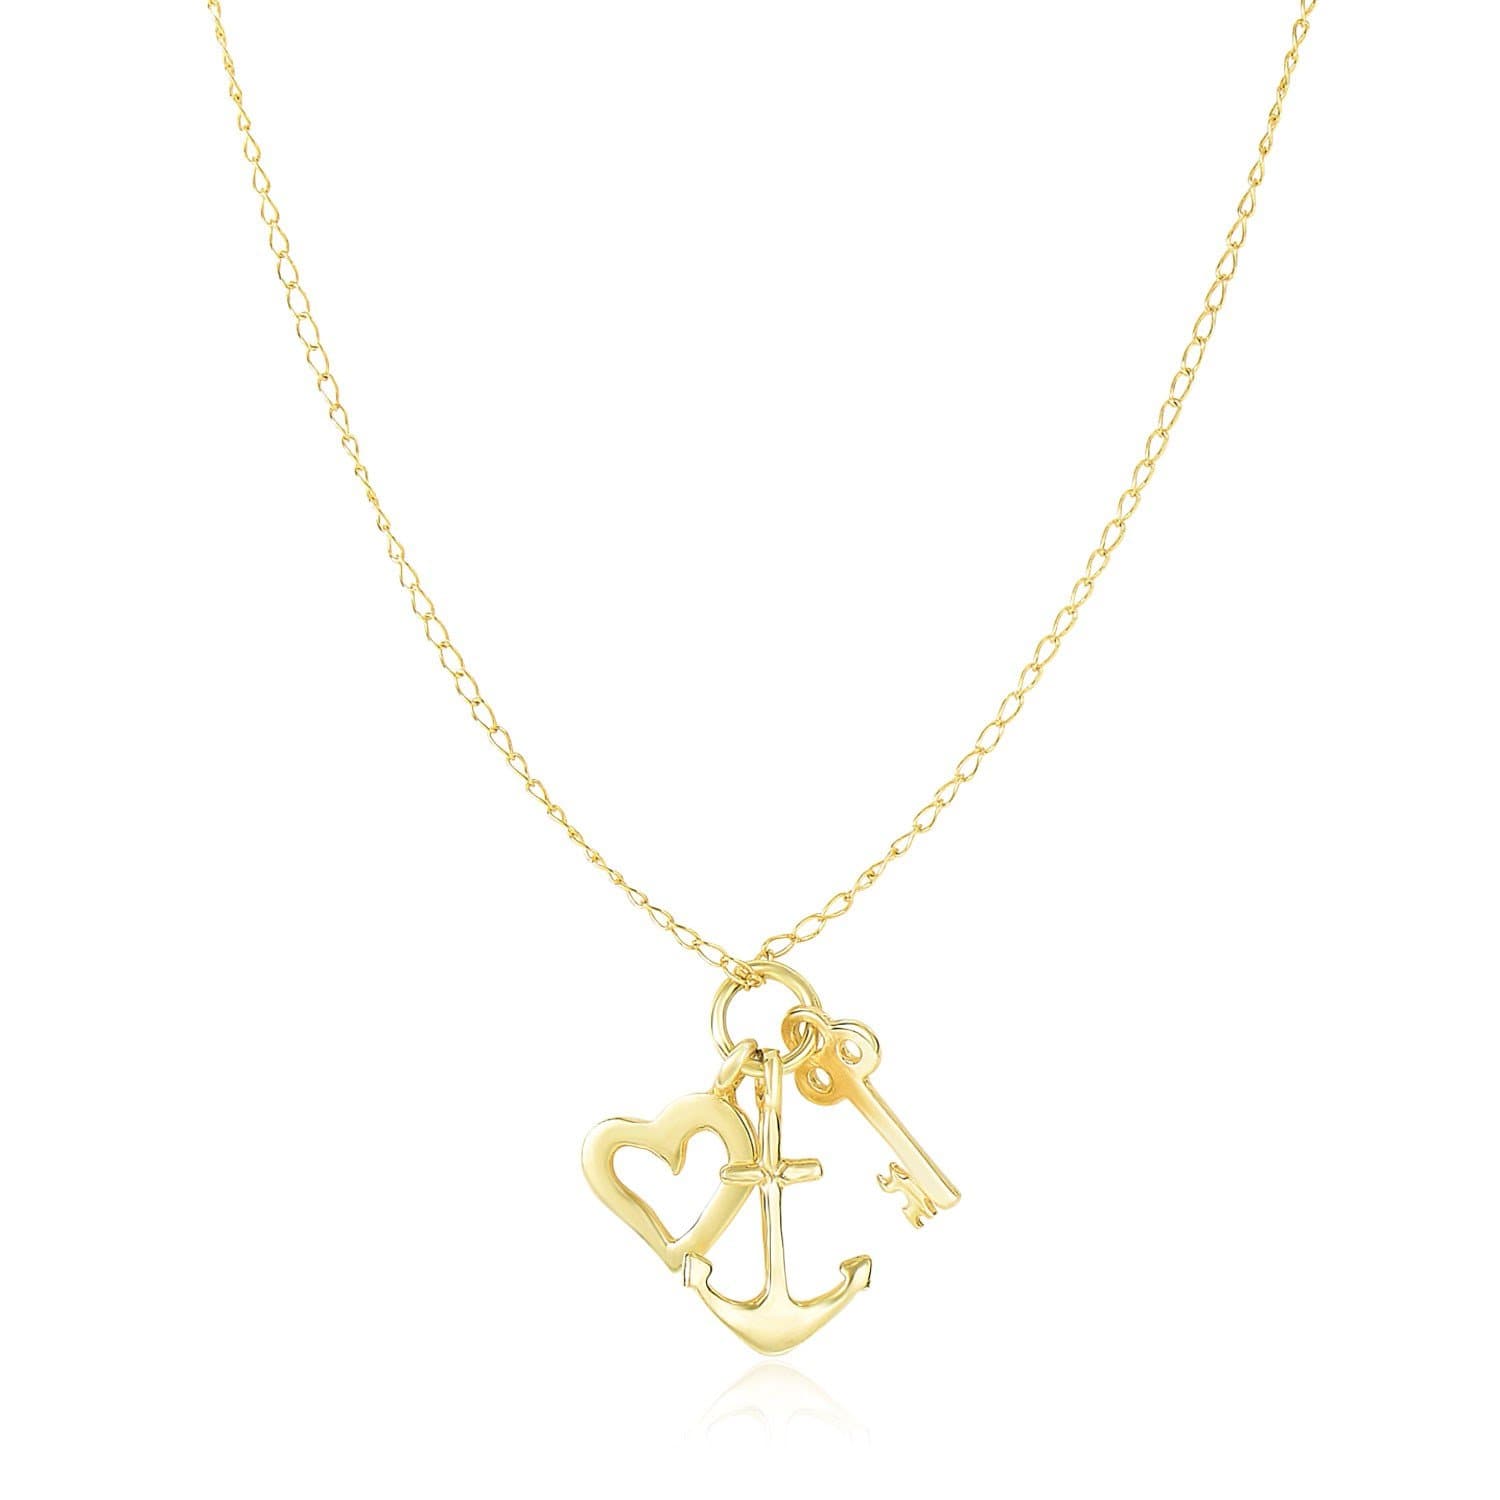 14K Yellow Gold Anchor, Heart, and Skeleton Key Cluster Charm Necklace